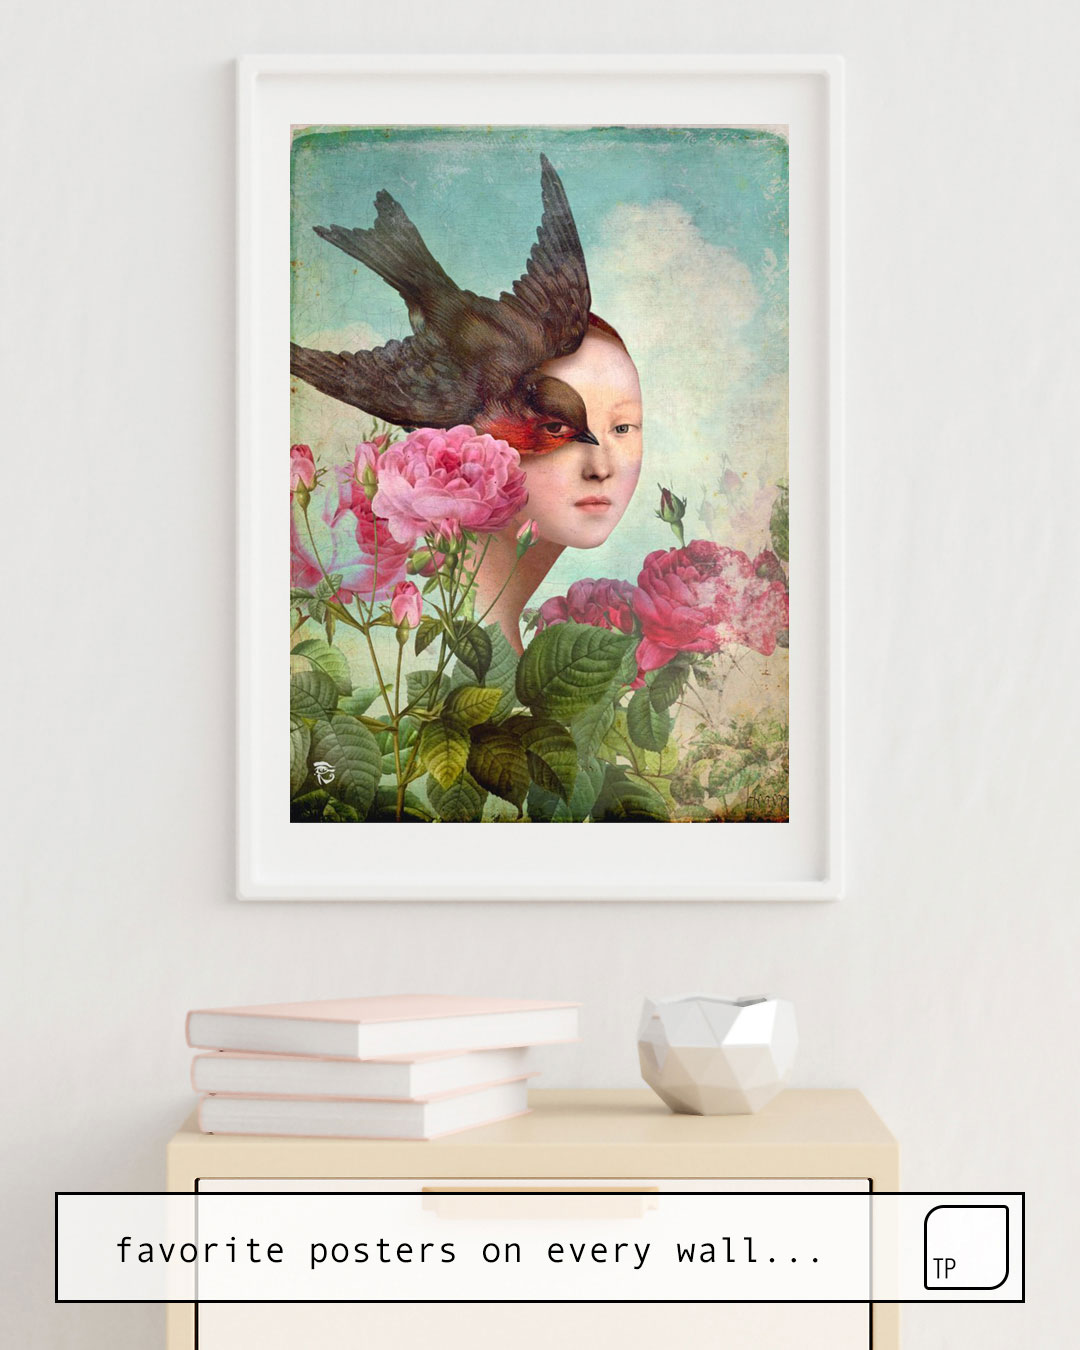 The photo shows an example of furnishing with the motif THE SILENT GARDEN by Christian Schloe as mural